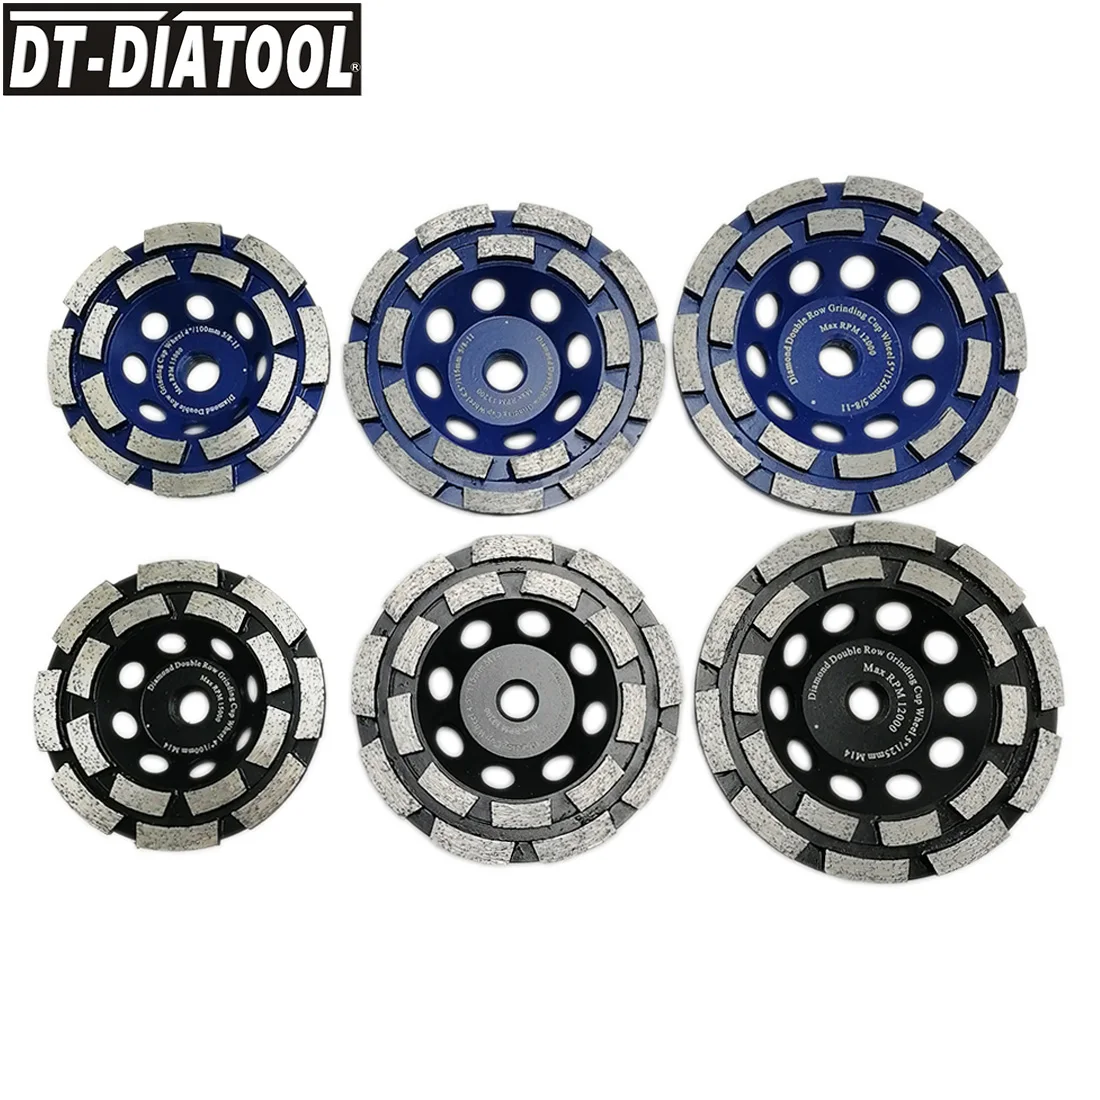 

DT-DIATOOL 2pcs/pk 100/115/125/180mm Diamond Double Row Cup Grinding Wheel M14 or 5/8-11 for Concrete hard stone granite marble